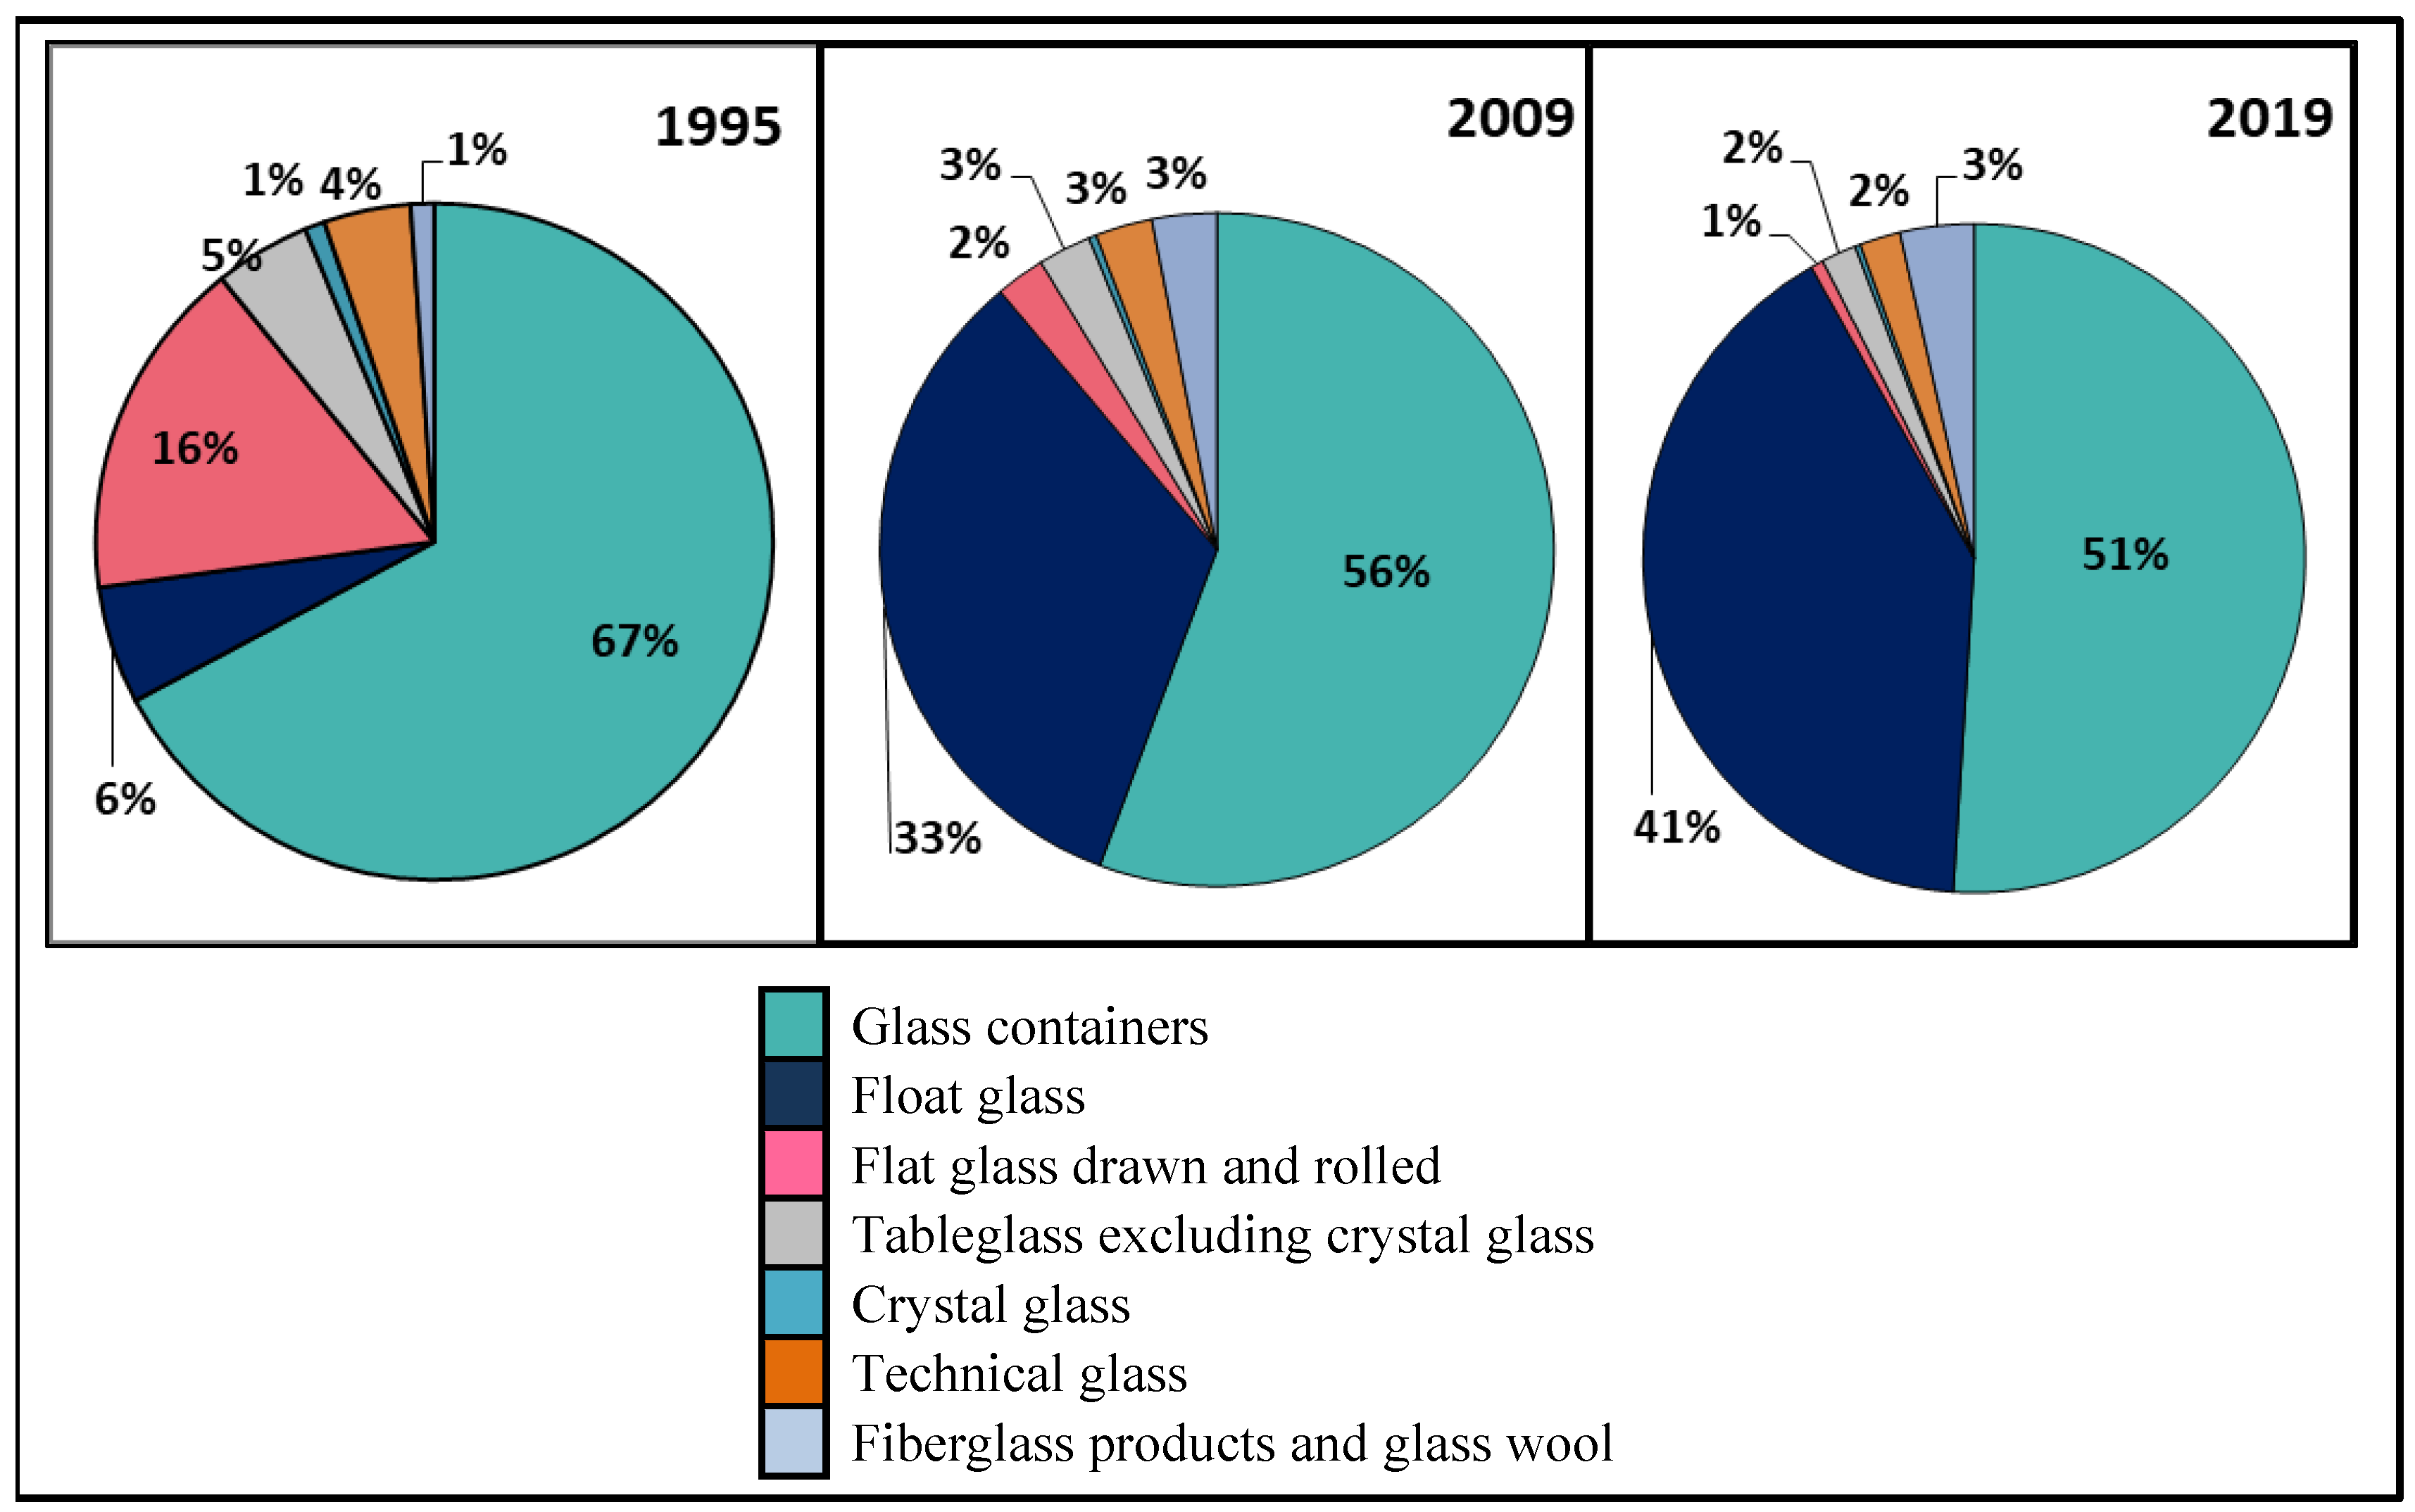 How Silica Sand is Used in Glass Manufacturing